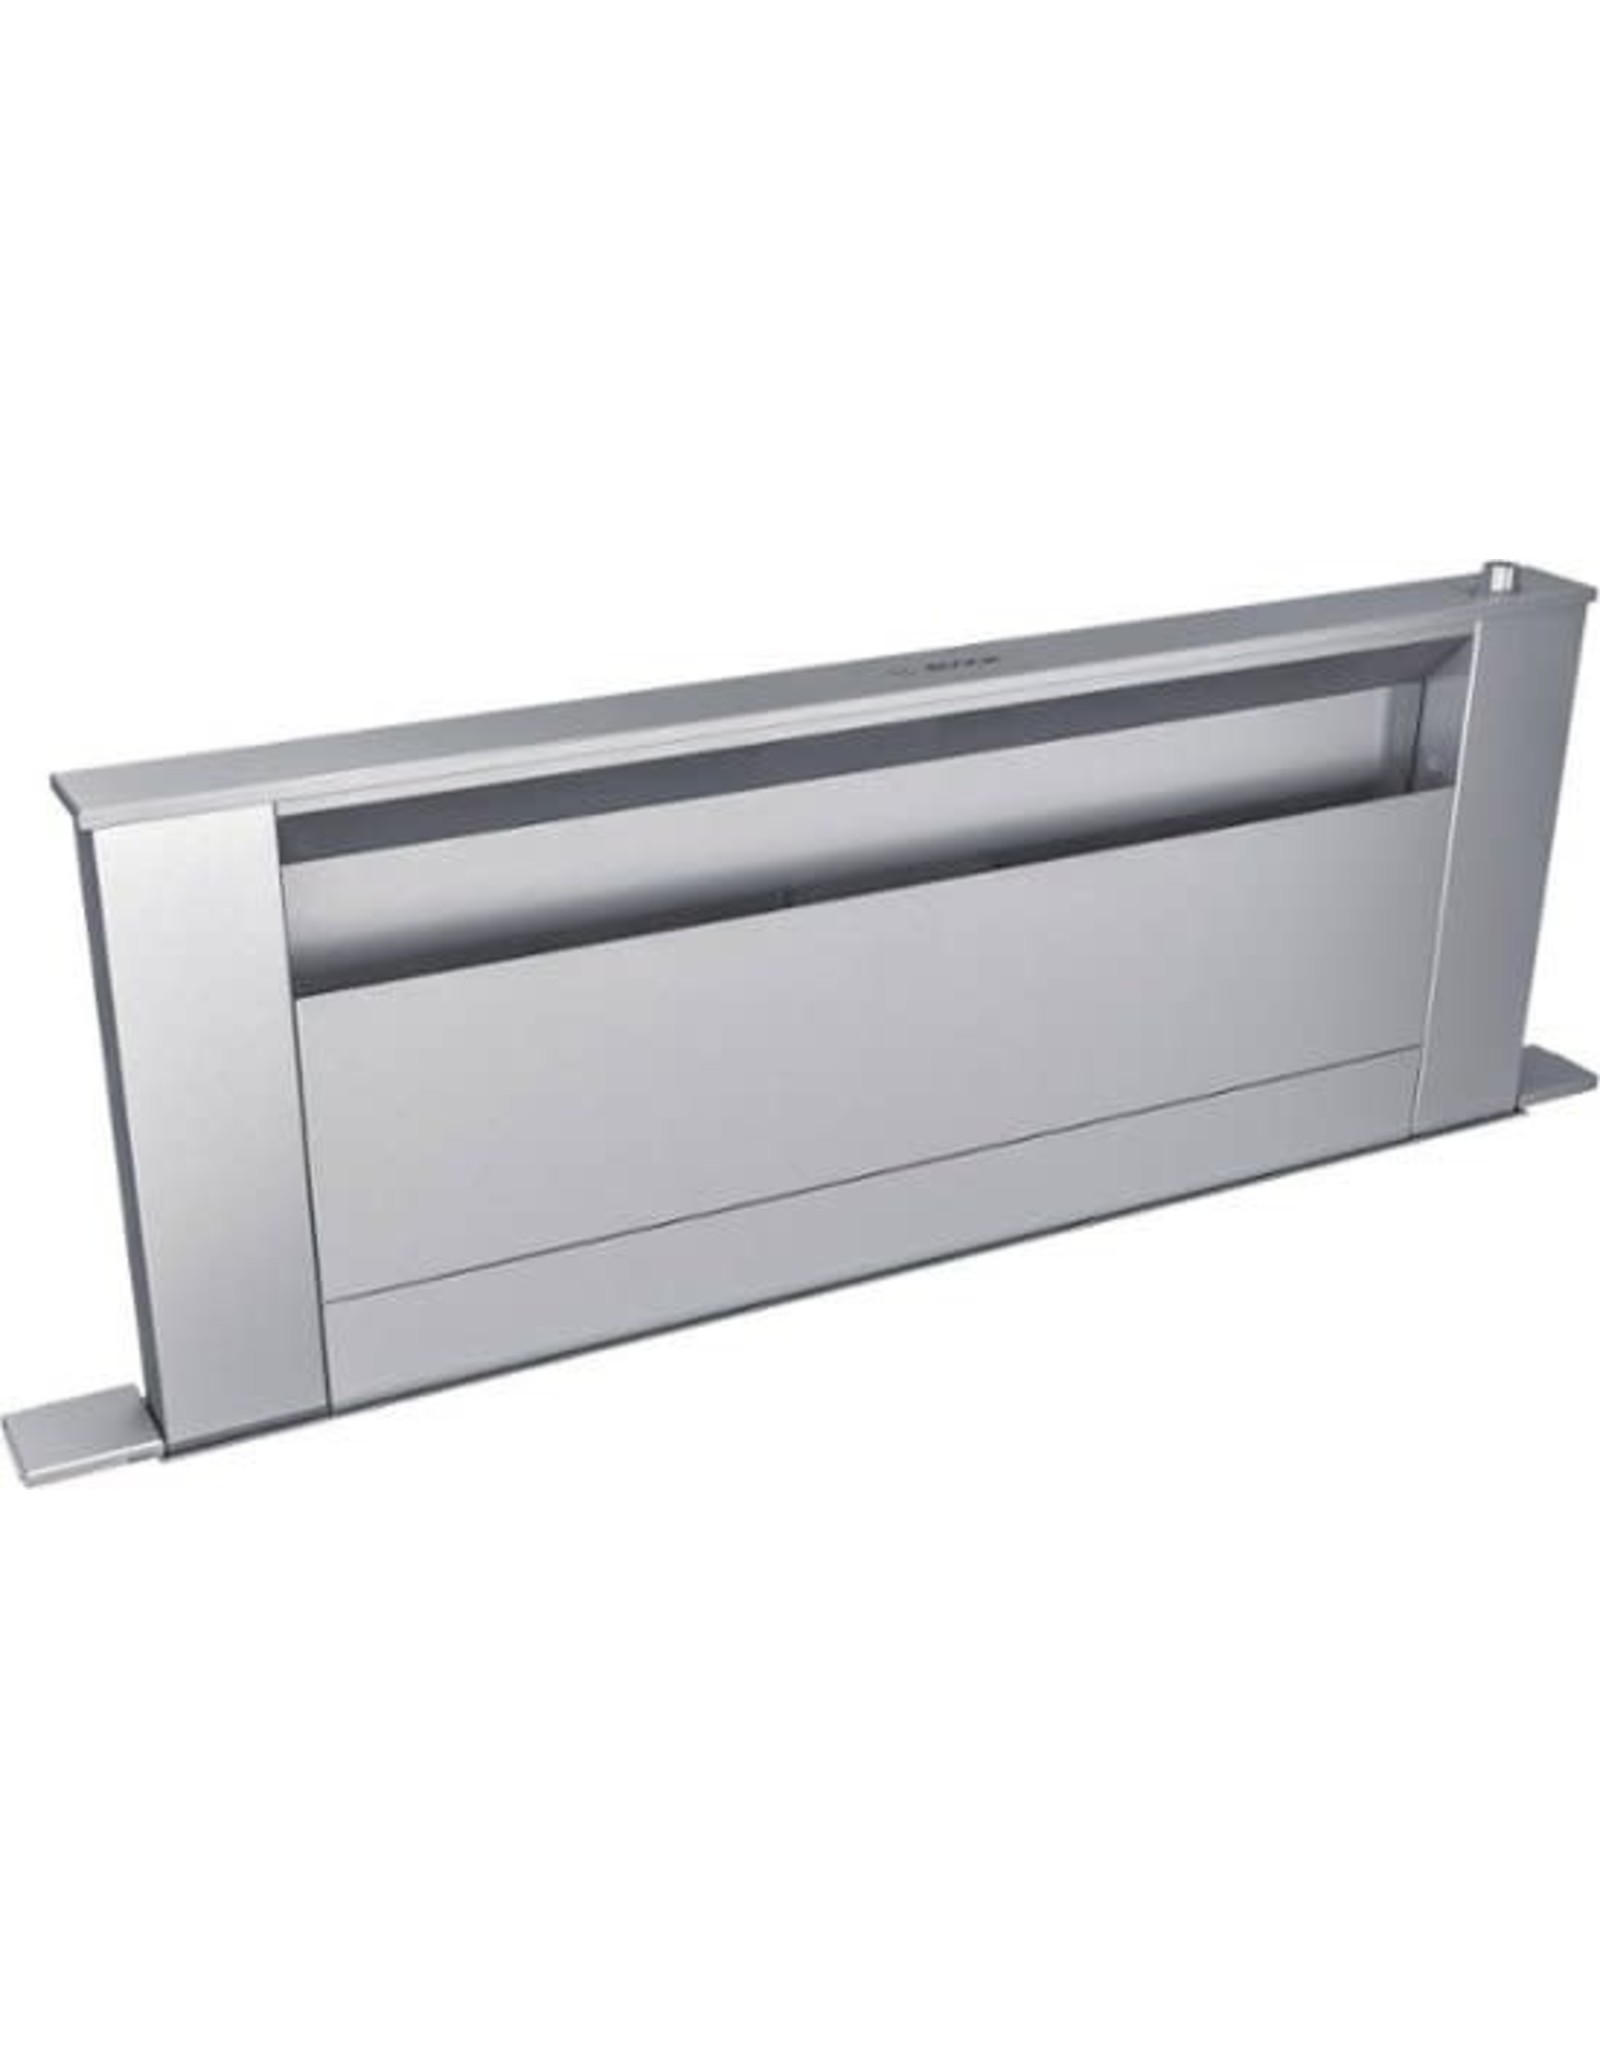 HDD86051UC Bosch  800 Series 36-in Telescoping Stainless Steel Downdraft Range Hood with Charcoal Filter